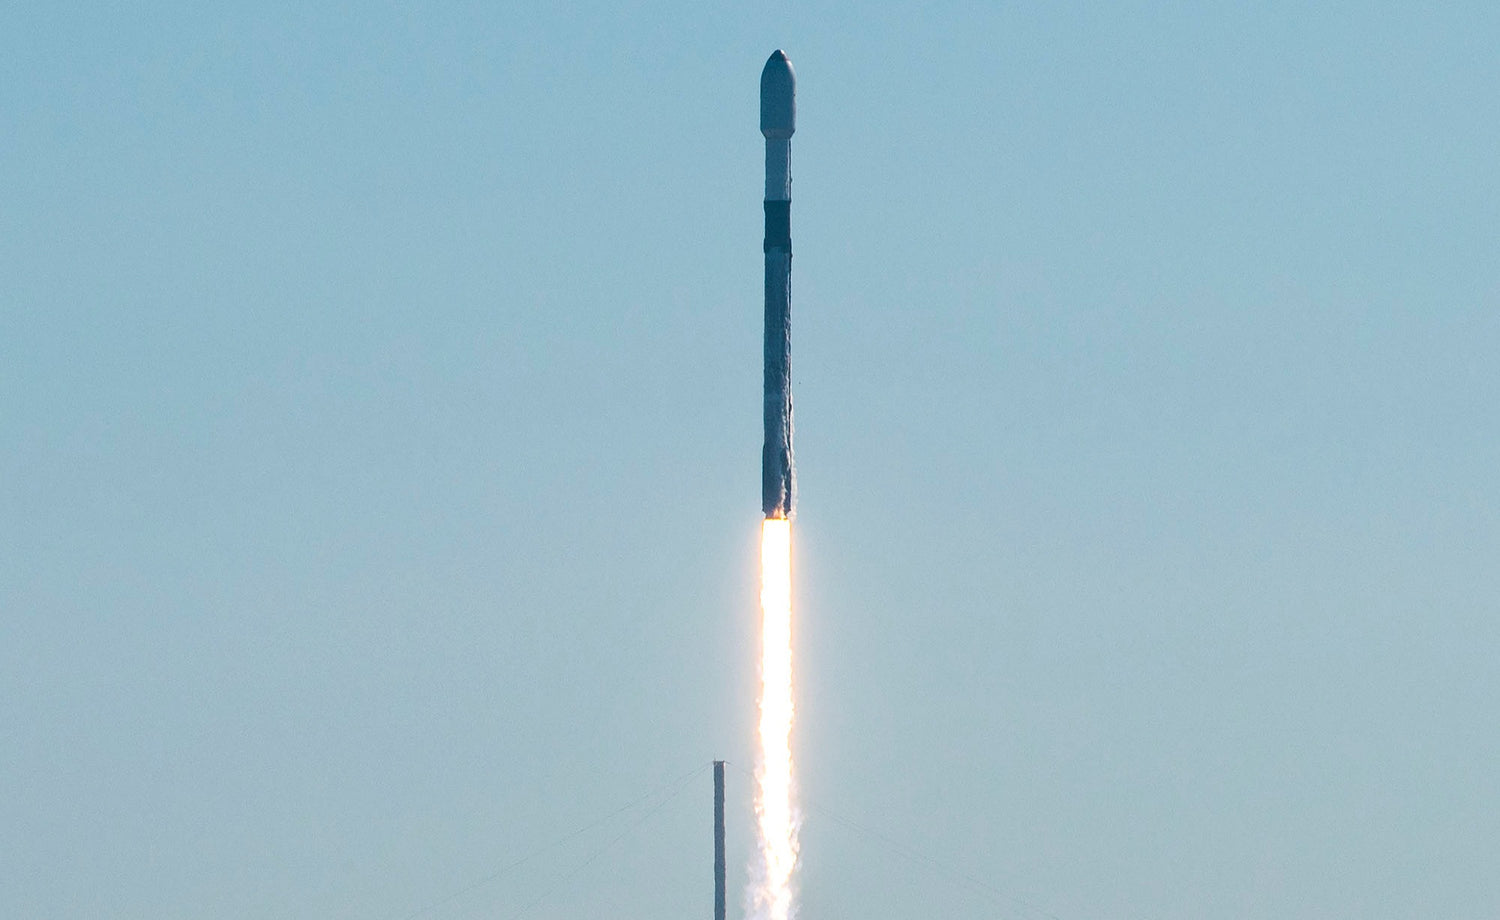 SpaceX veteran Falcon 9 rocket conducts eleventh flight to deploy Starlink satellites